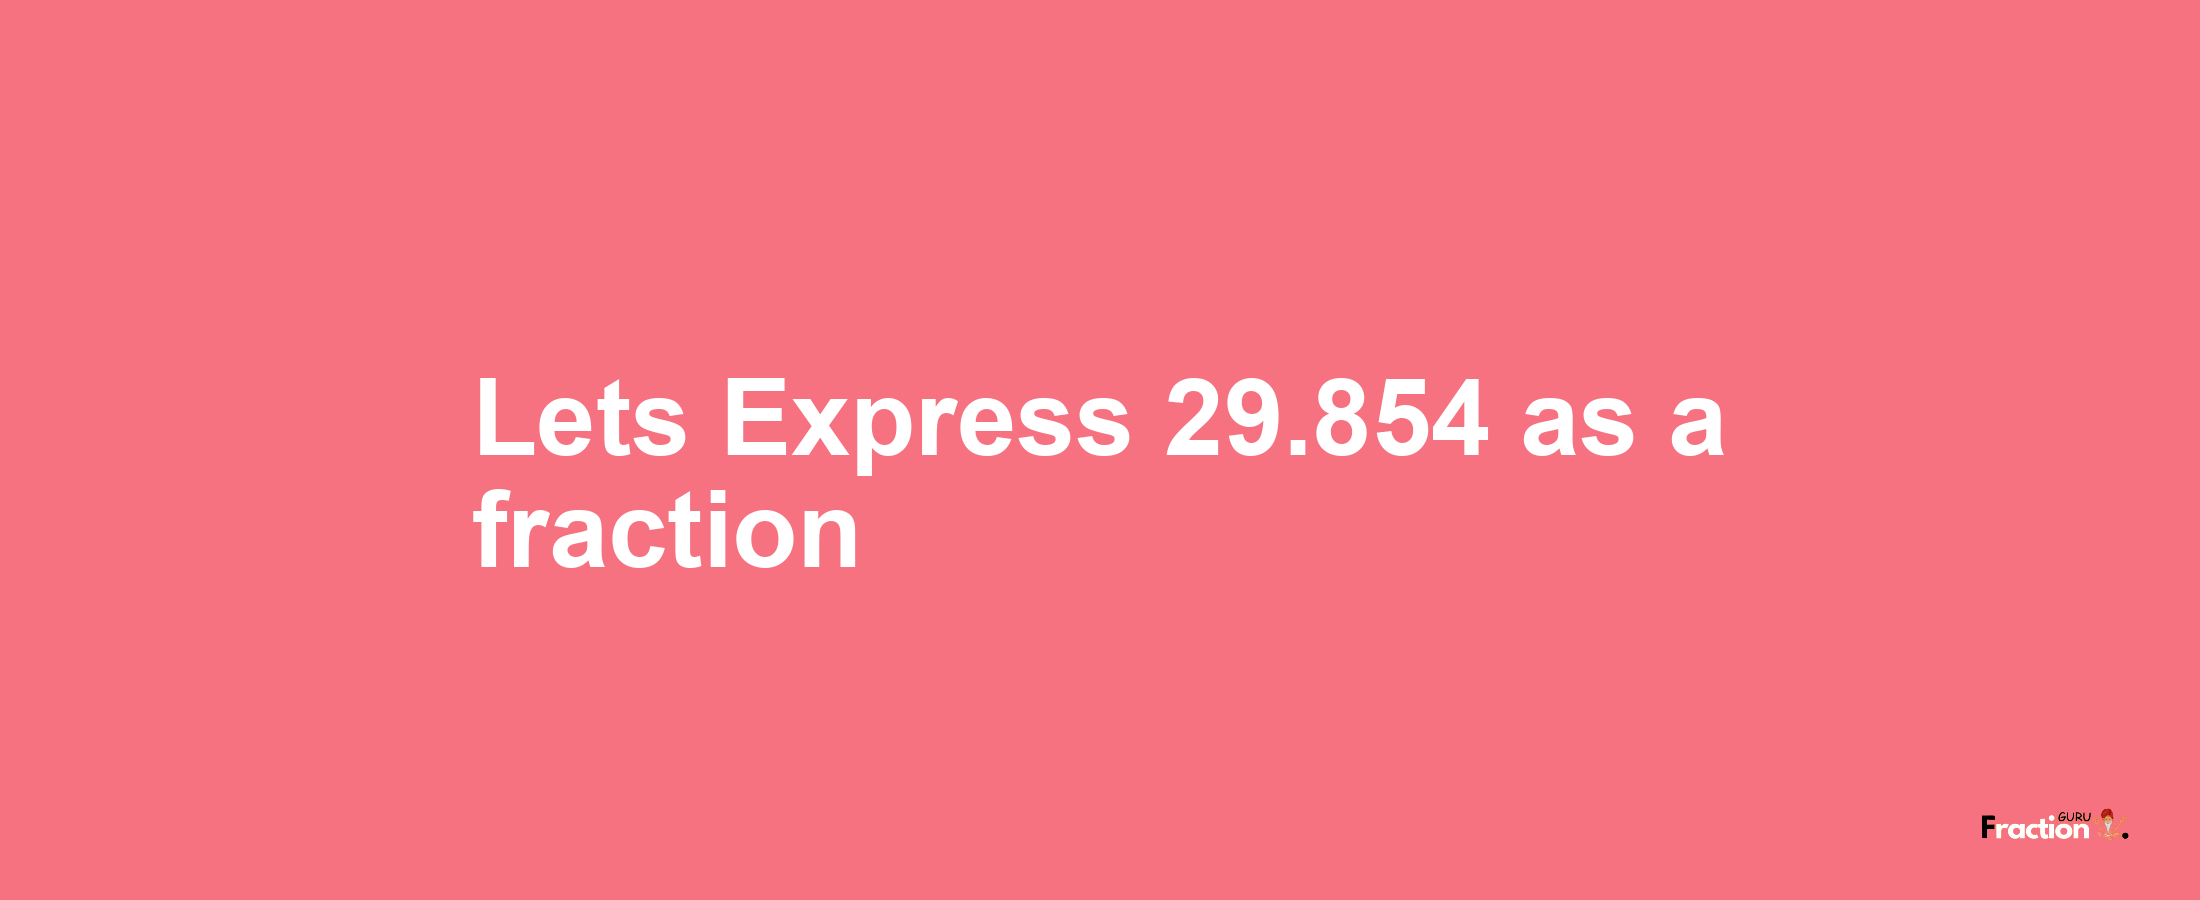 Lets Express 29.854 as afraction